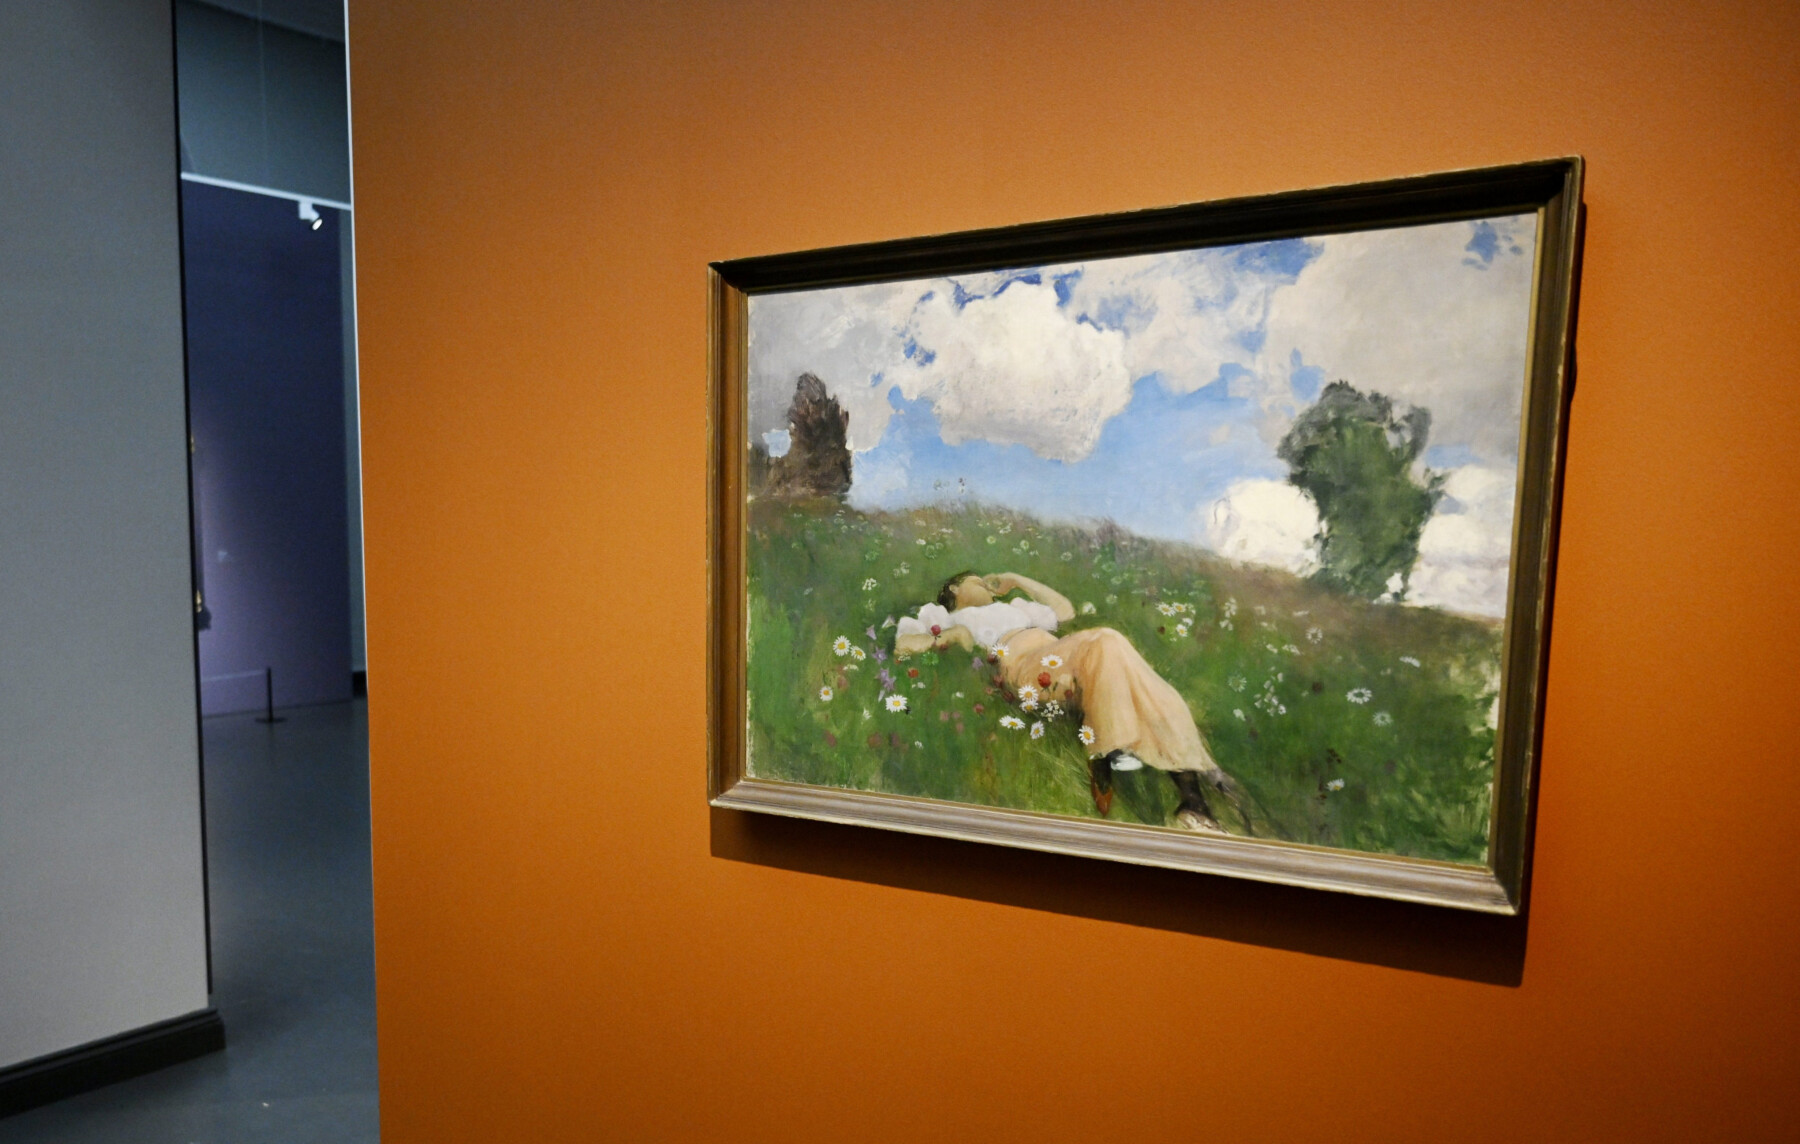 A painting hanging in a gallery shows a woman lying in a field of flowers under a blue sky with scattered clouds.